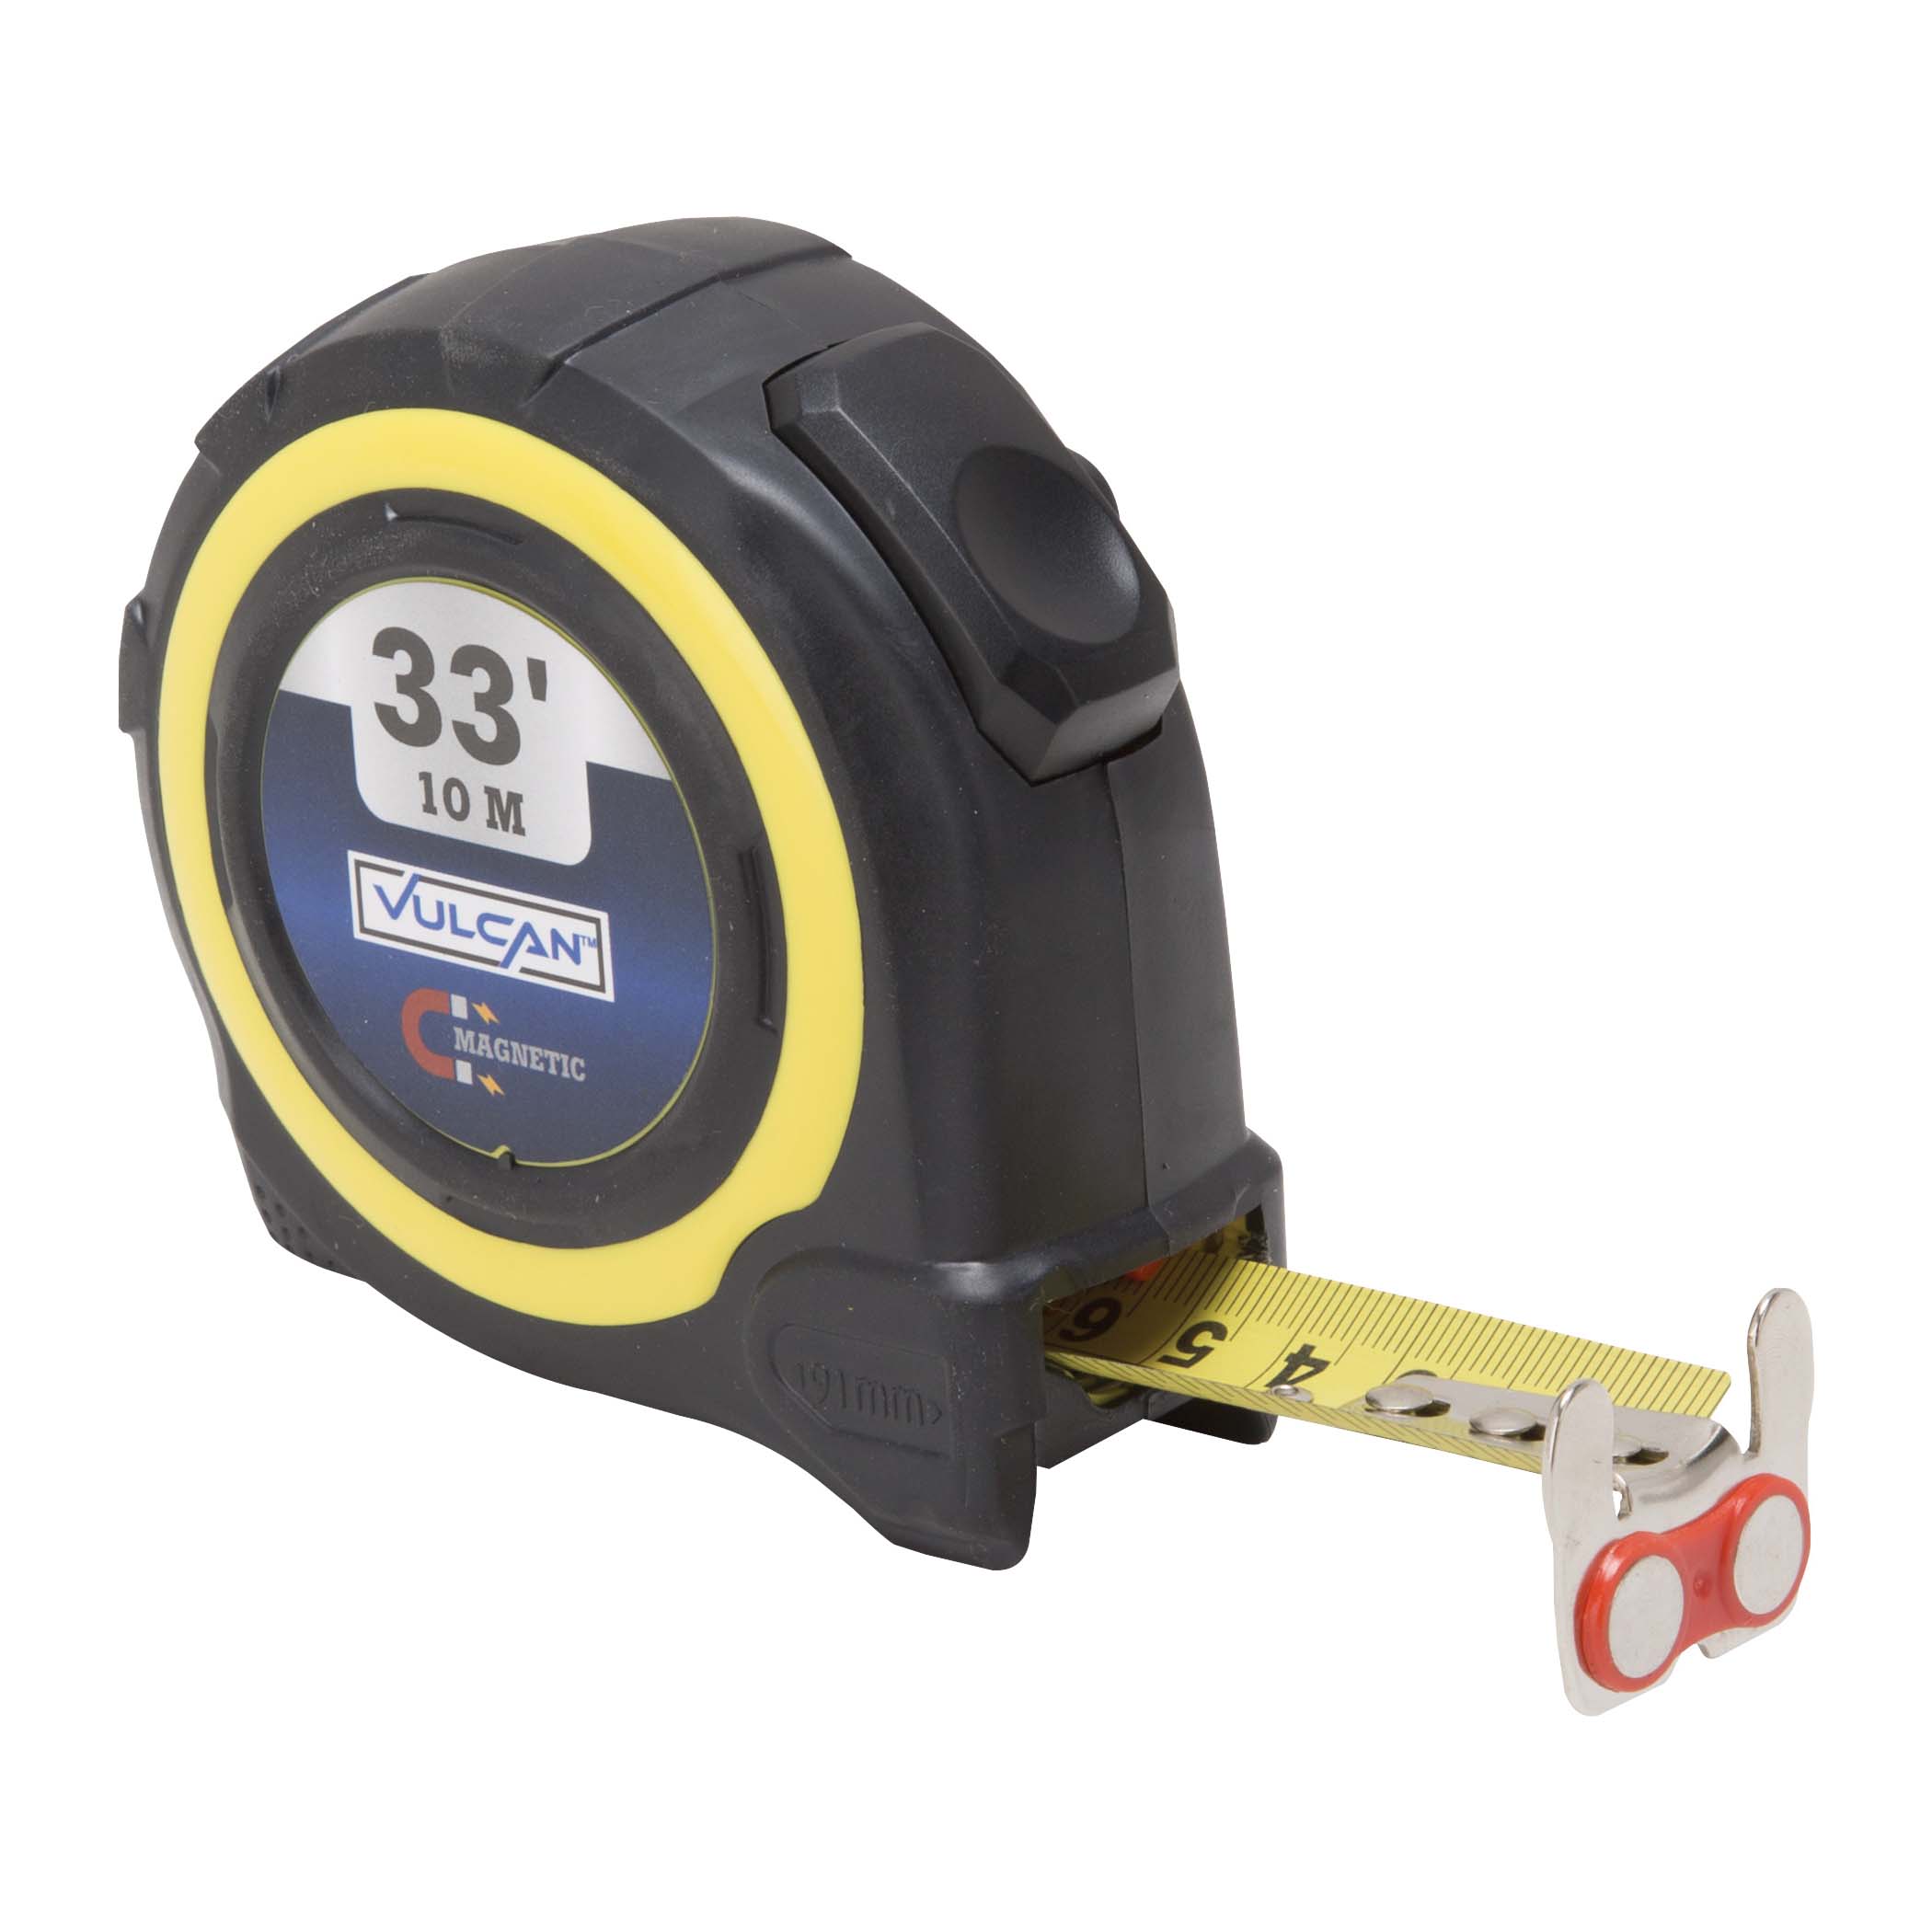 58-10X25-A Tape Measure, 33 ft L Blade, 1 in W Blade, Steel Blade, ABS Plastic Case, Yellow Case